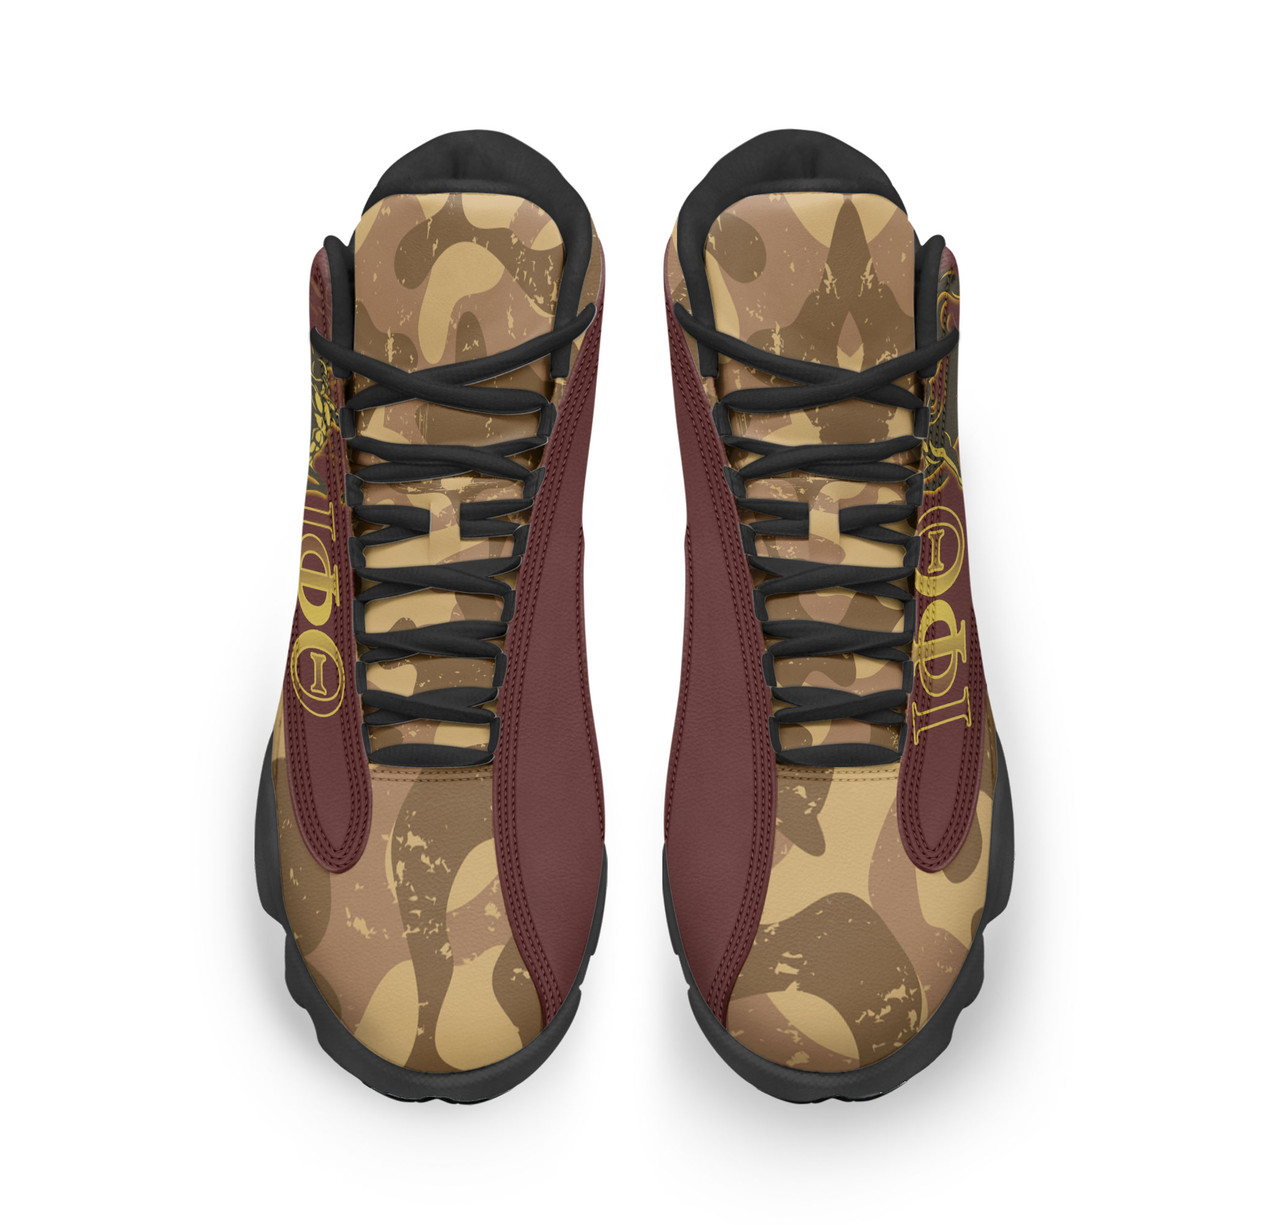 Iota Phi Theta High Top Basketball Shoes J 13 - Fraternity Hand Gesture Camouflage Patterns High Top Sneakers J 13